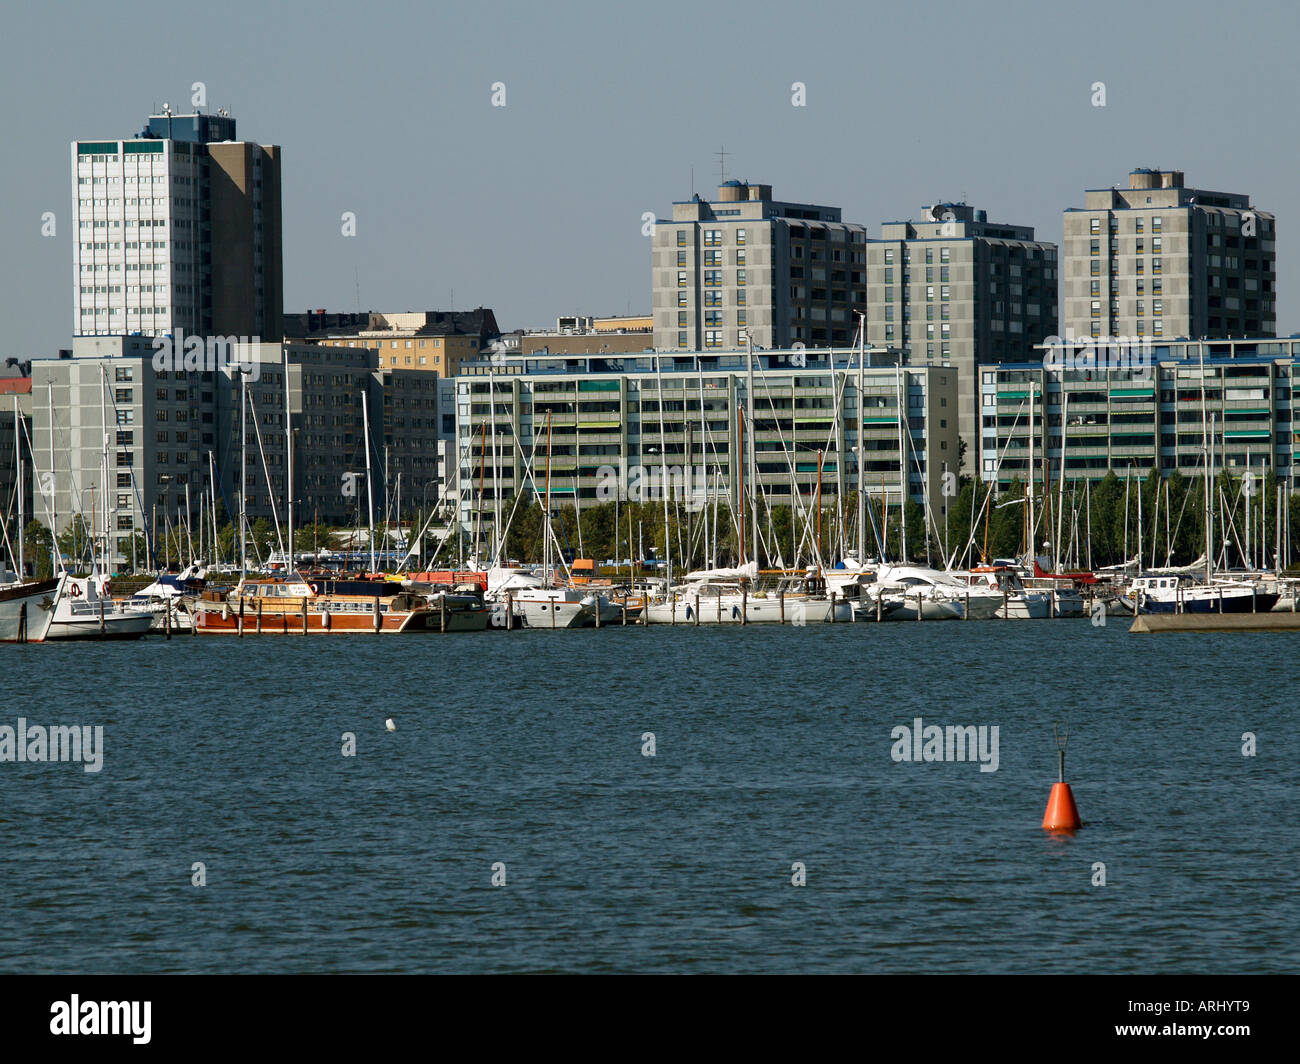 Merihaka part of the town Helsinki with concrete blocks of flats apartement buildings on the shore of the Baltic Sea Stock Photo